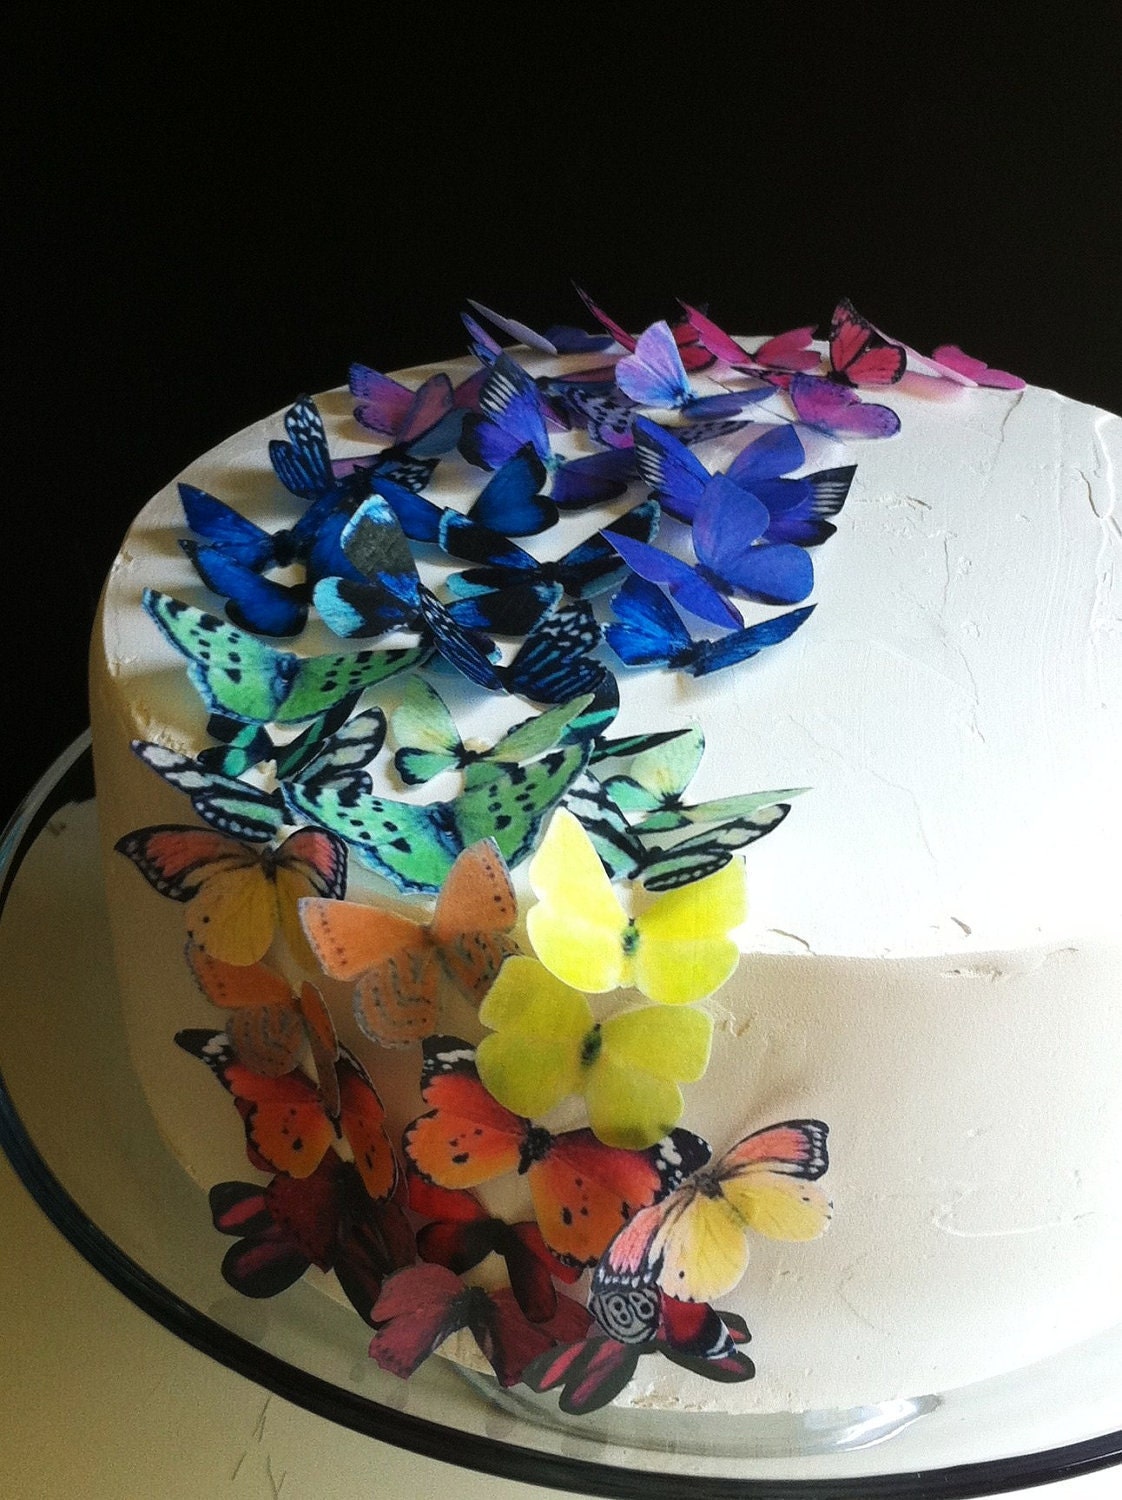 EDIBLE Butterflies The Original - Rainbow Collection 50 small - Cake & Cupcake toppers - PRECUT and Ready to Use - SugarRobot